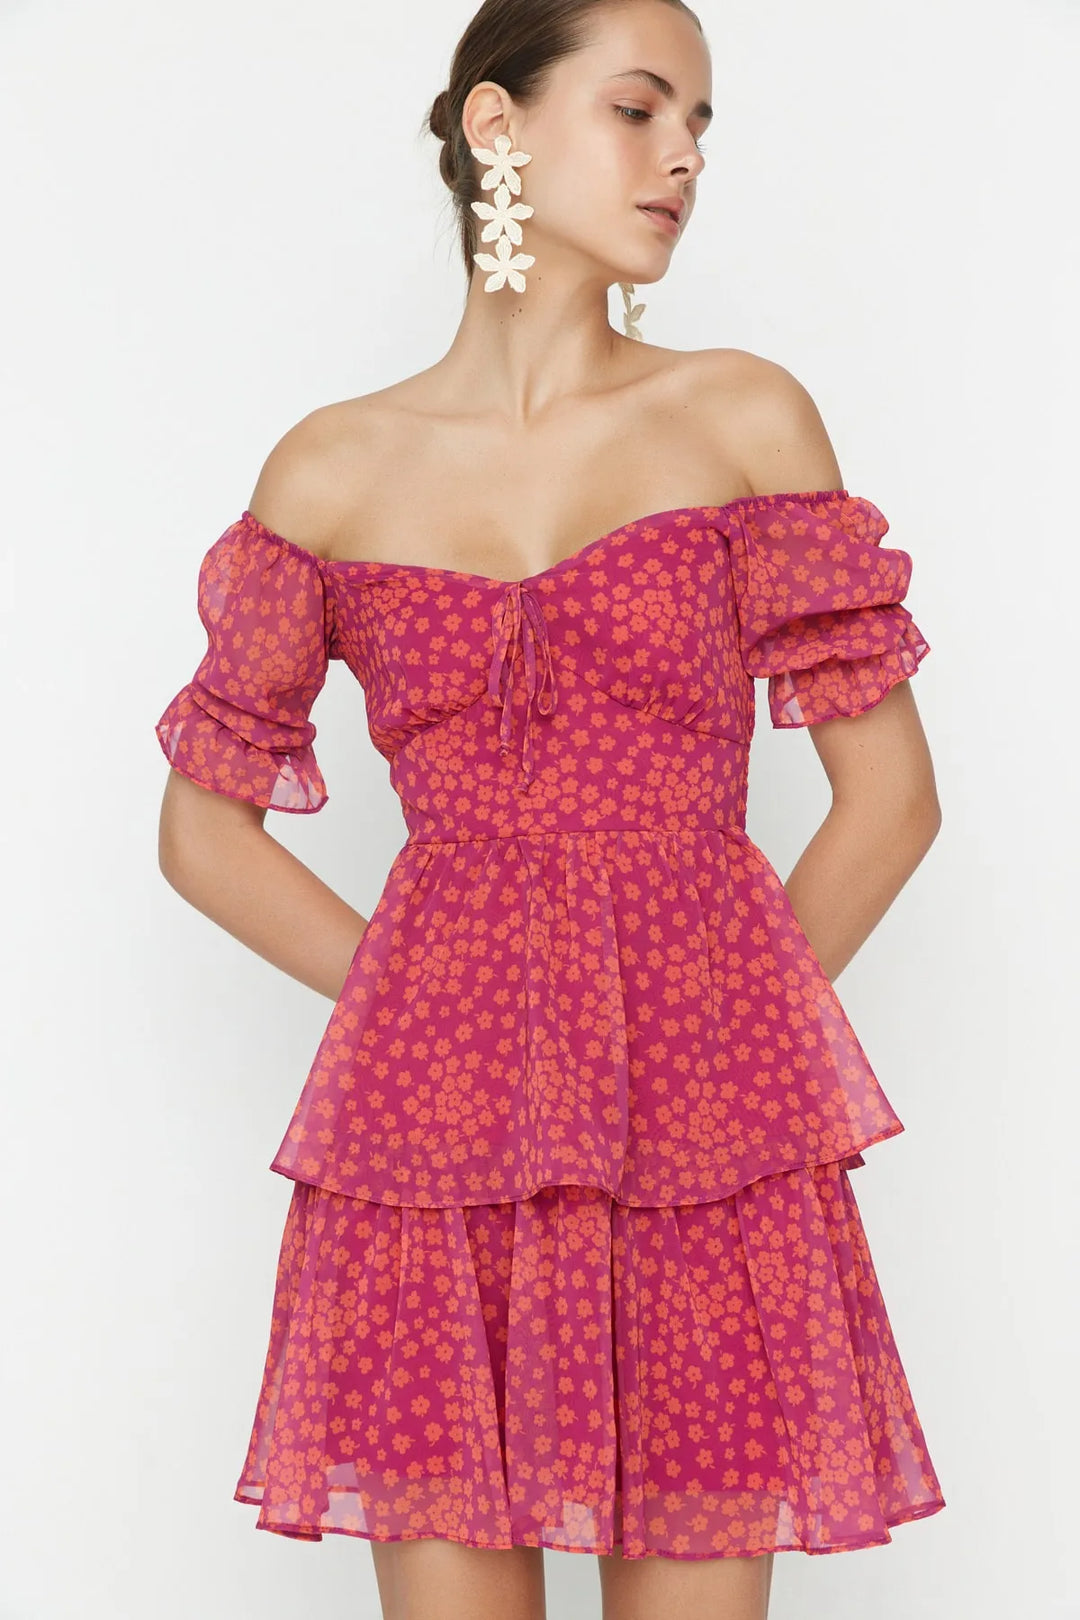 Floral Patterned Chiffon Woven Dress with Flounce Skirt